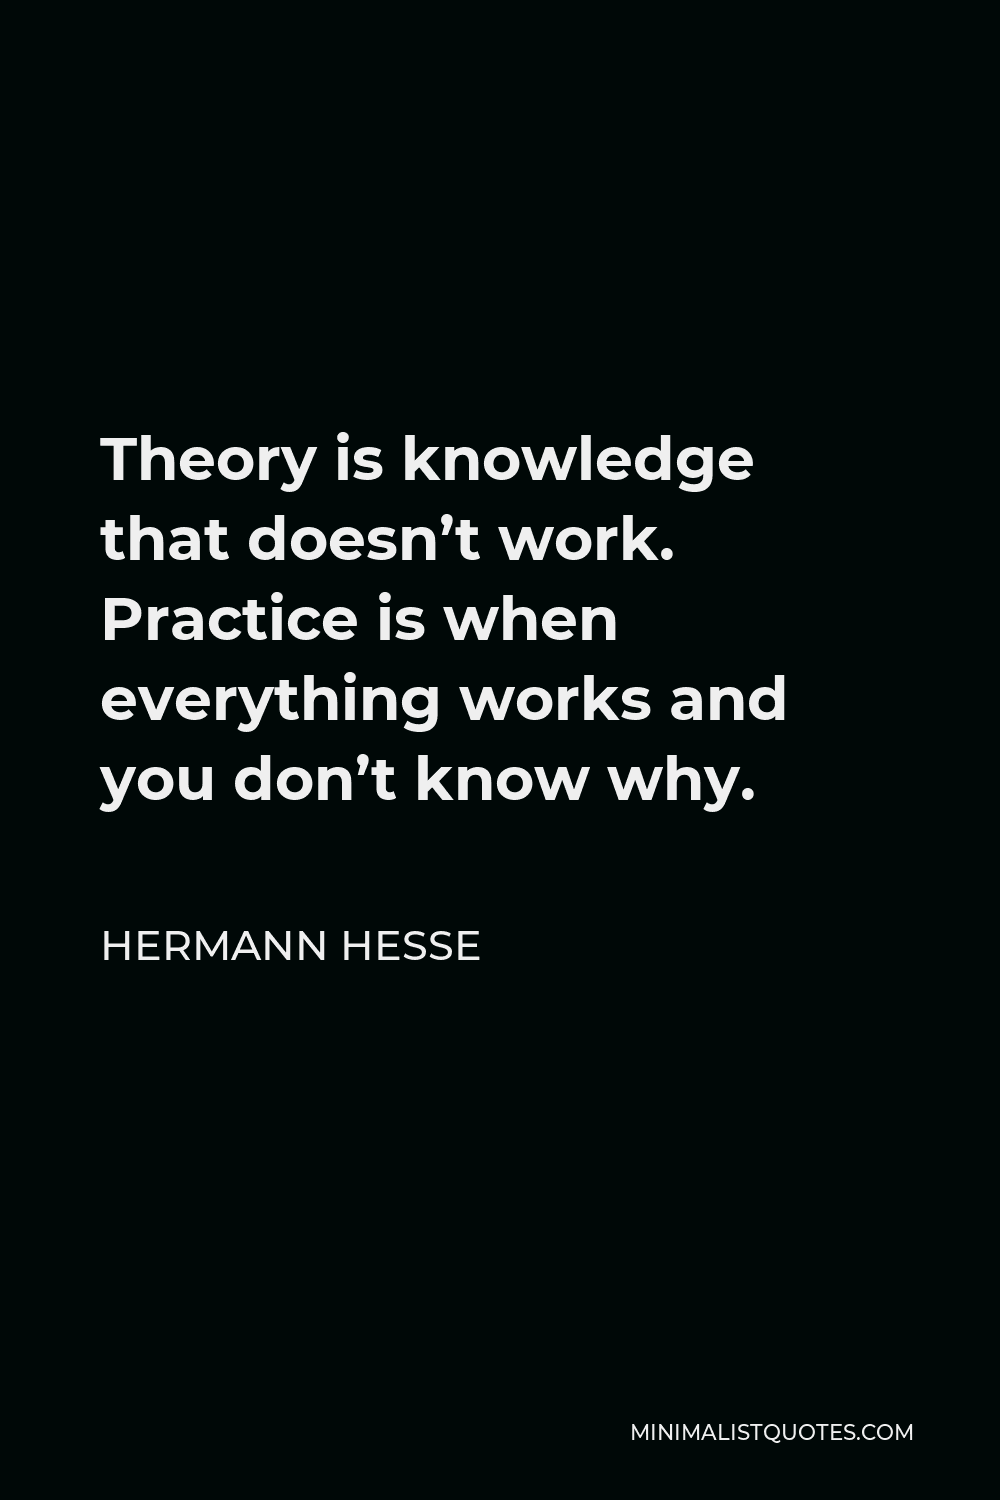 Hermann Hesse Quote Theory Is Knowledge That Doesn T Work Practice Is When Everything Works And You Don T Know Why